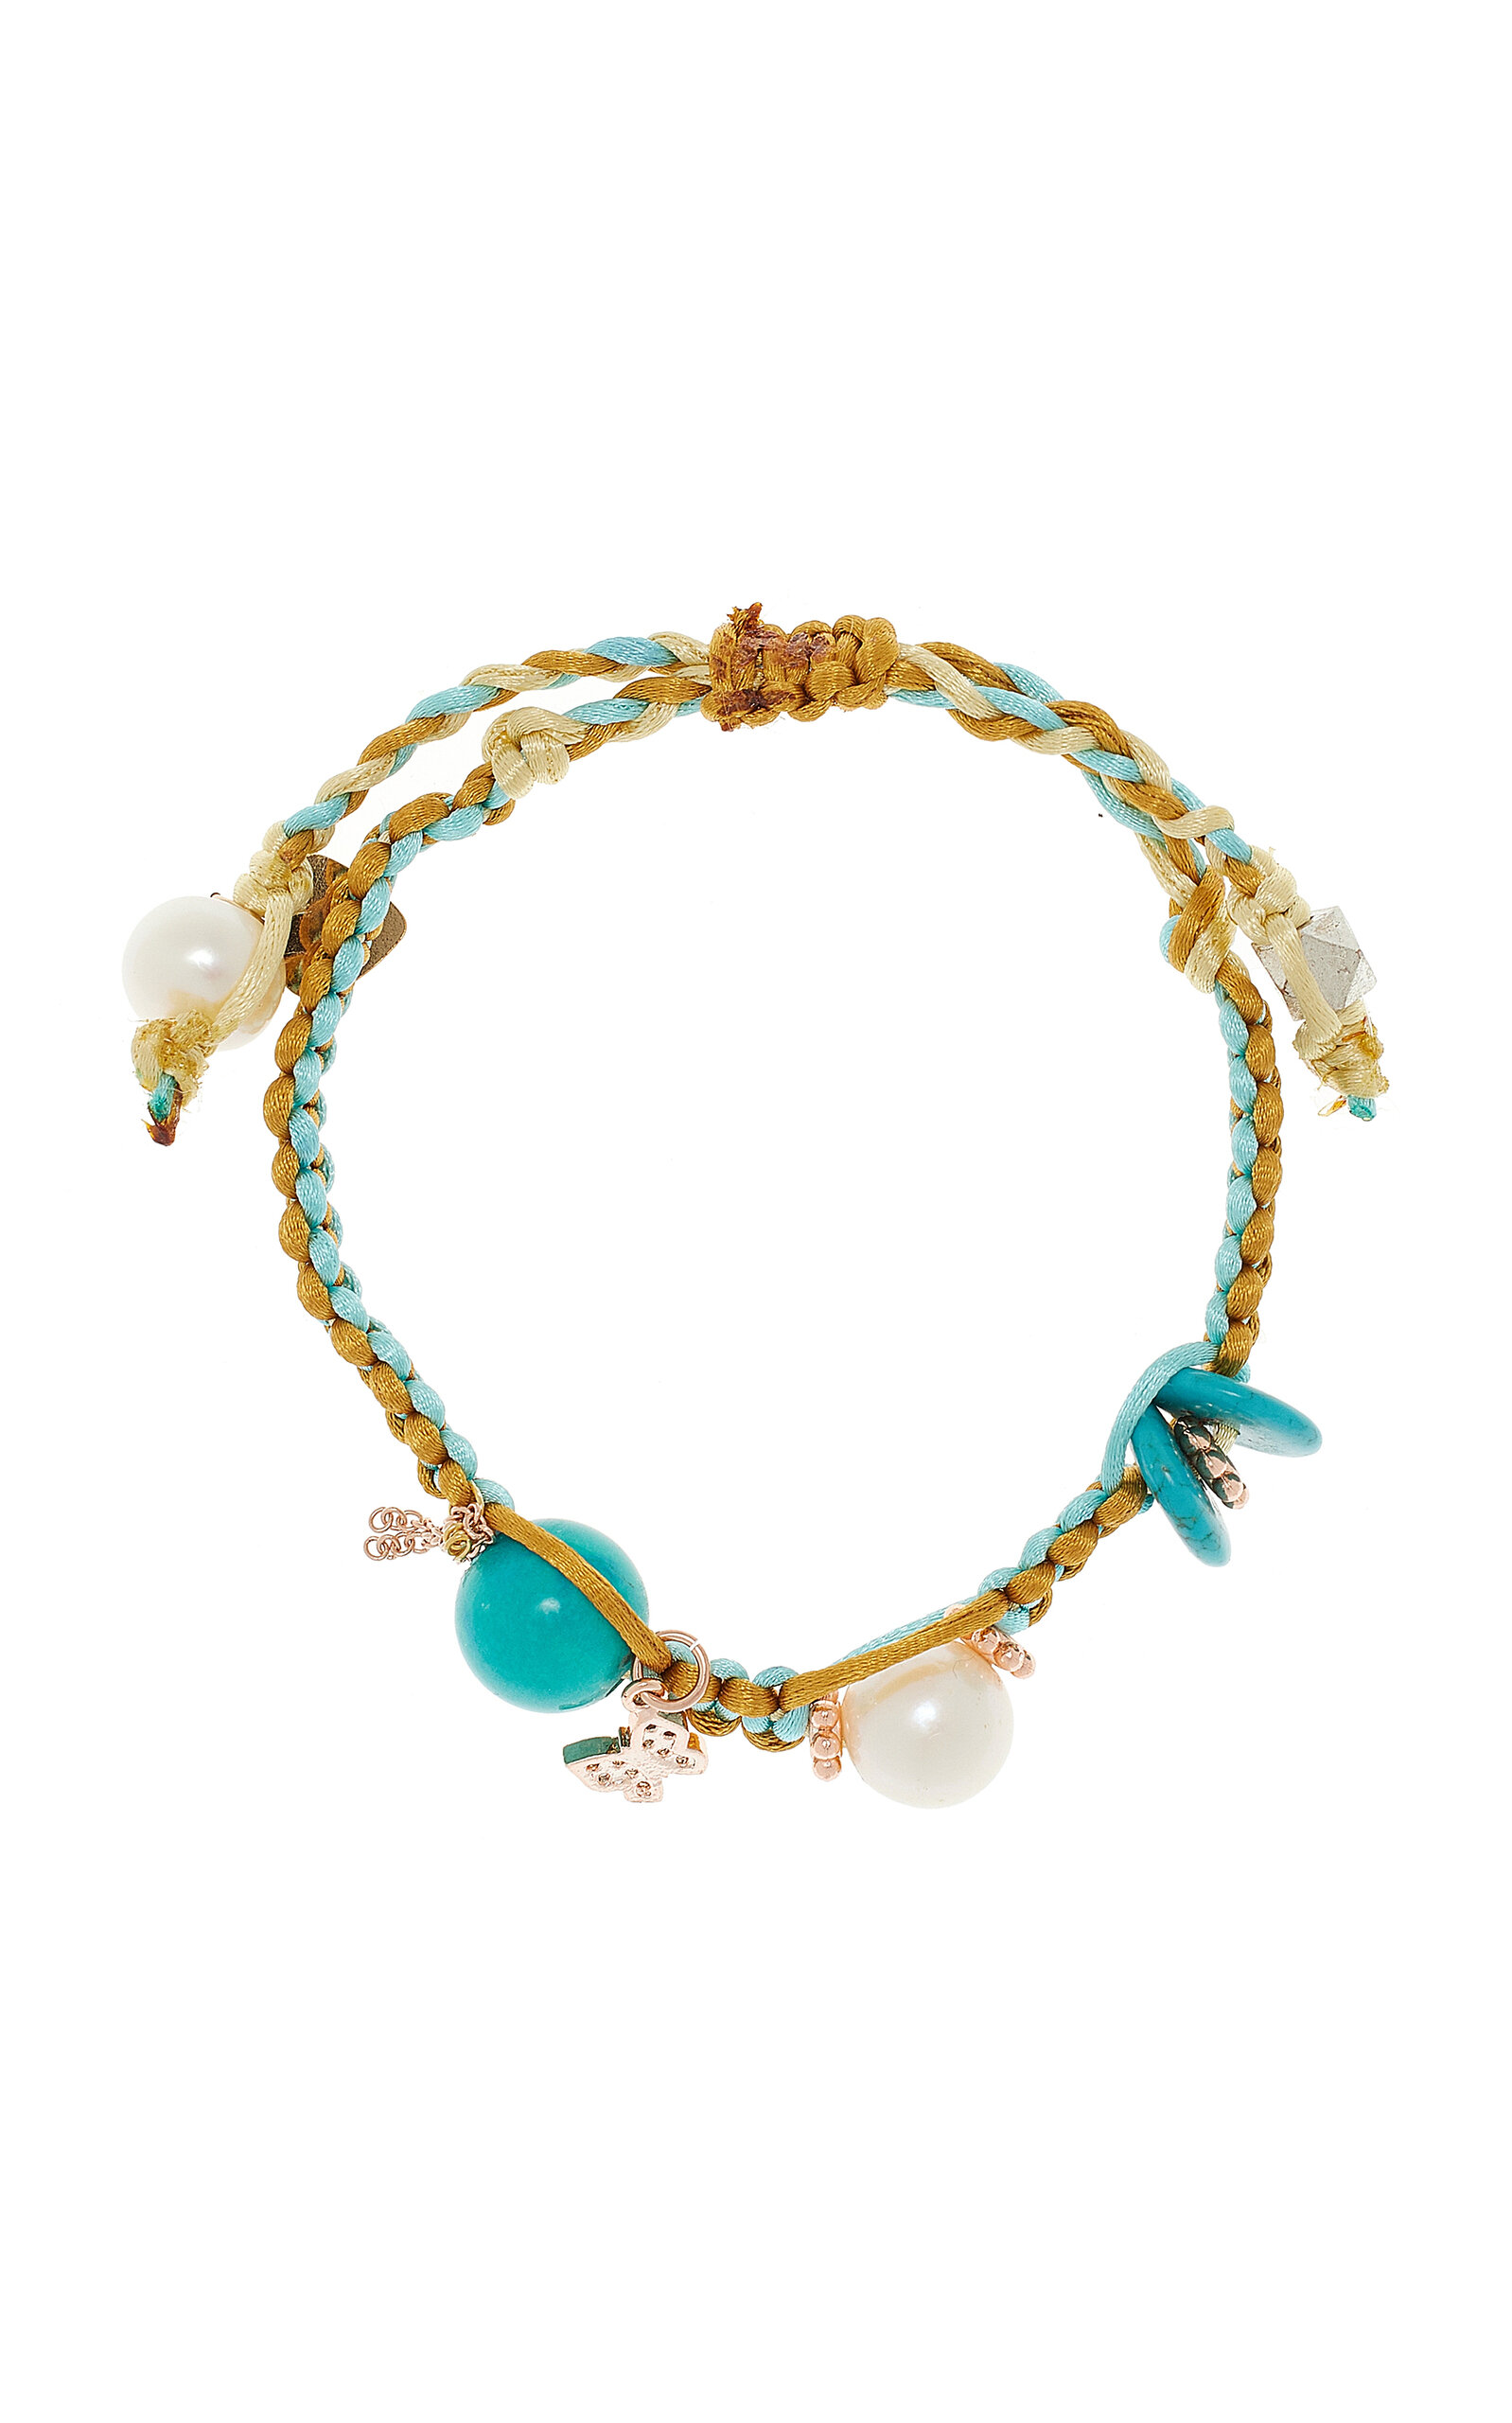 Joie Digiovanni Turquoise Sunrise Knotted Silk Bracelet In Gold